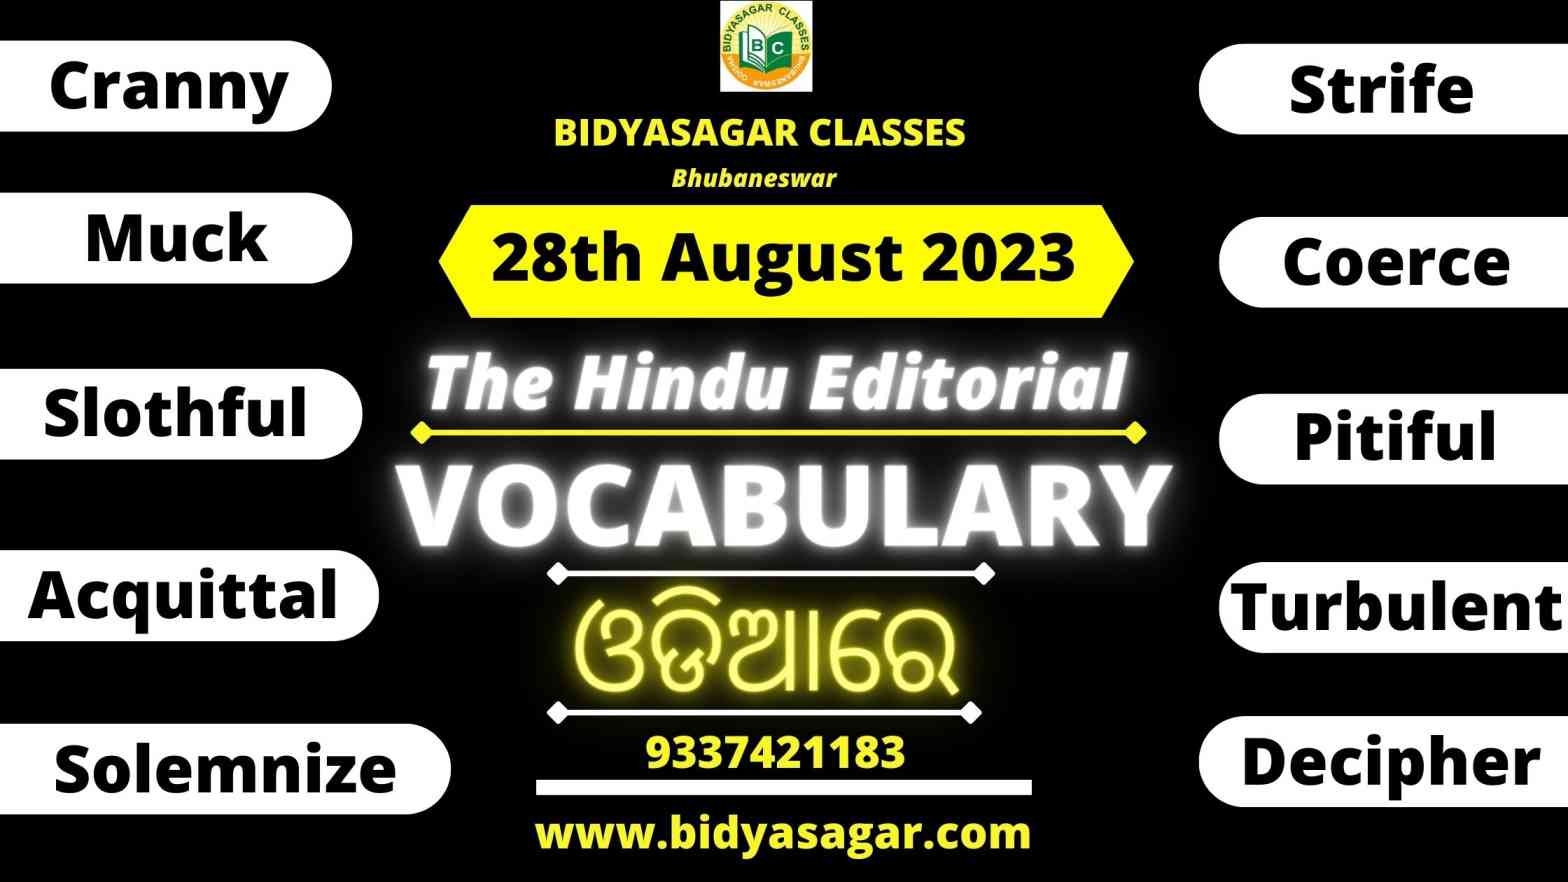 The Hindu Editorial Vocabulary of 28th August 2023